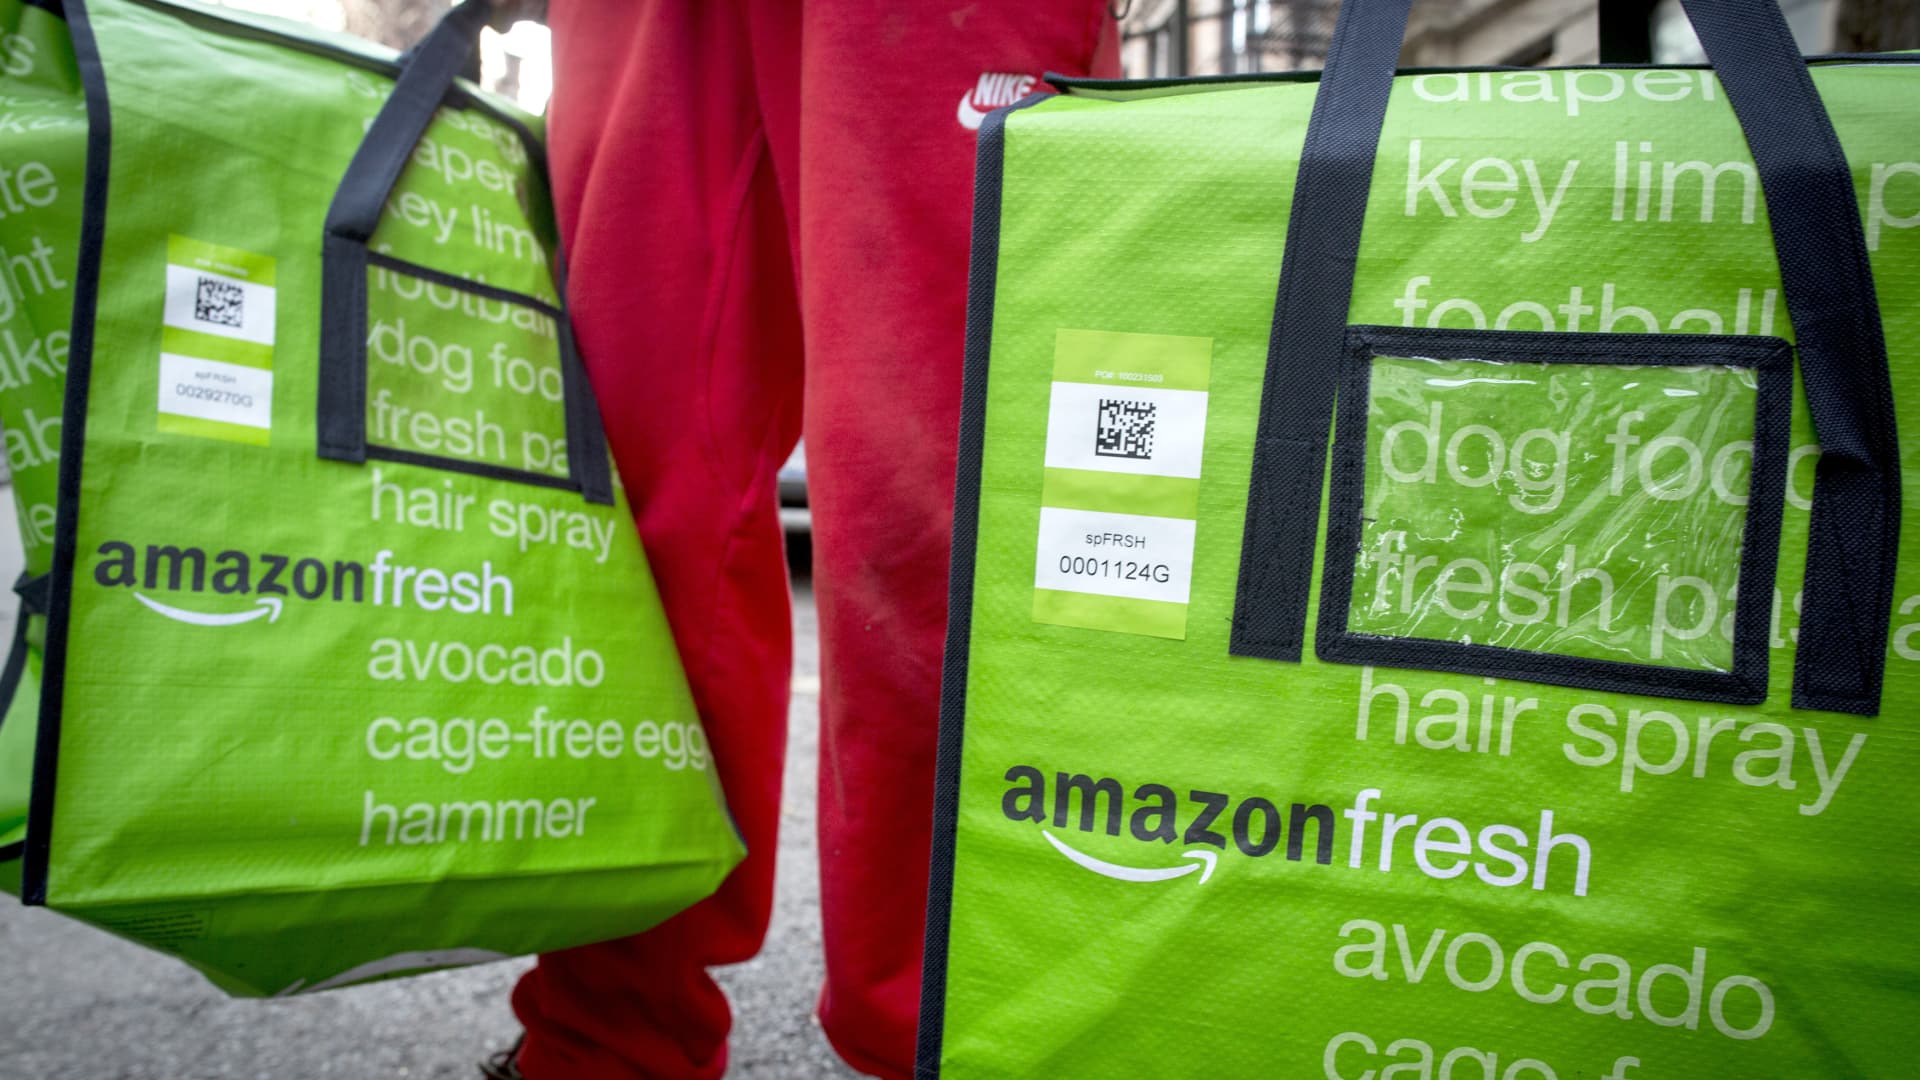 Amazon to start charging delivery fees on Fresh grocery orders under 0